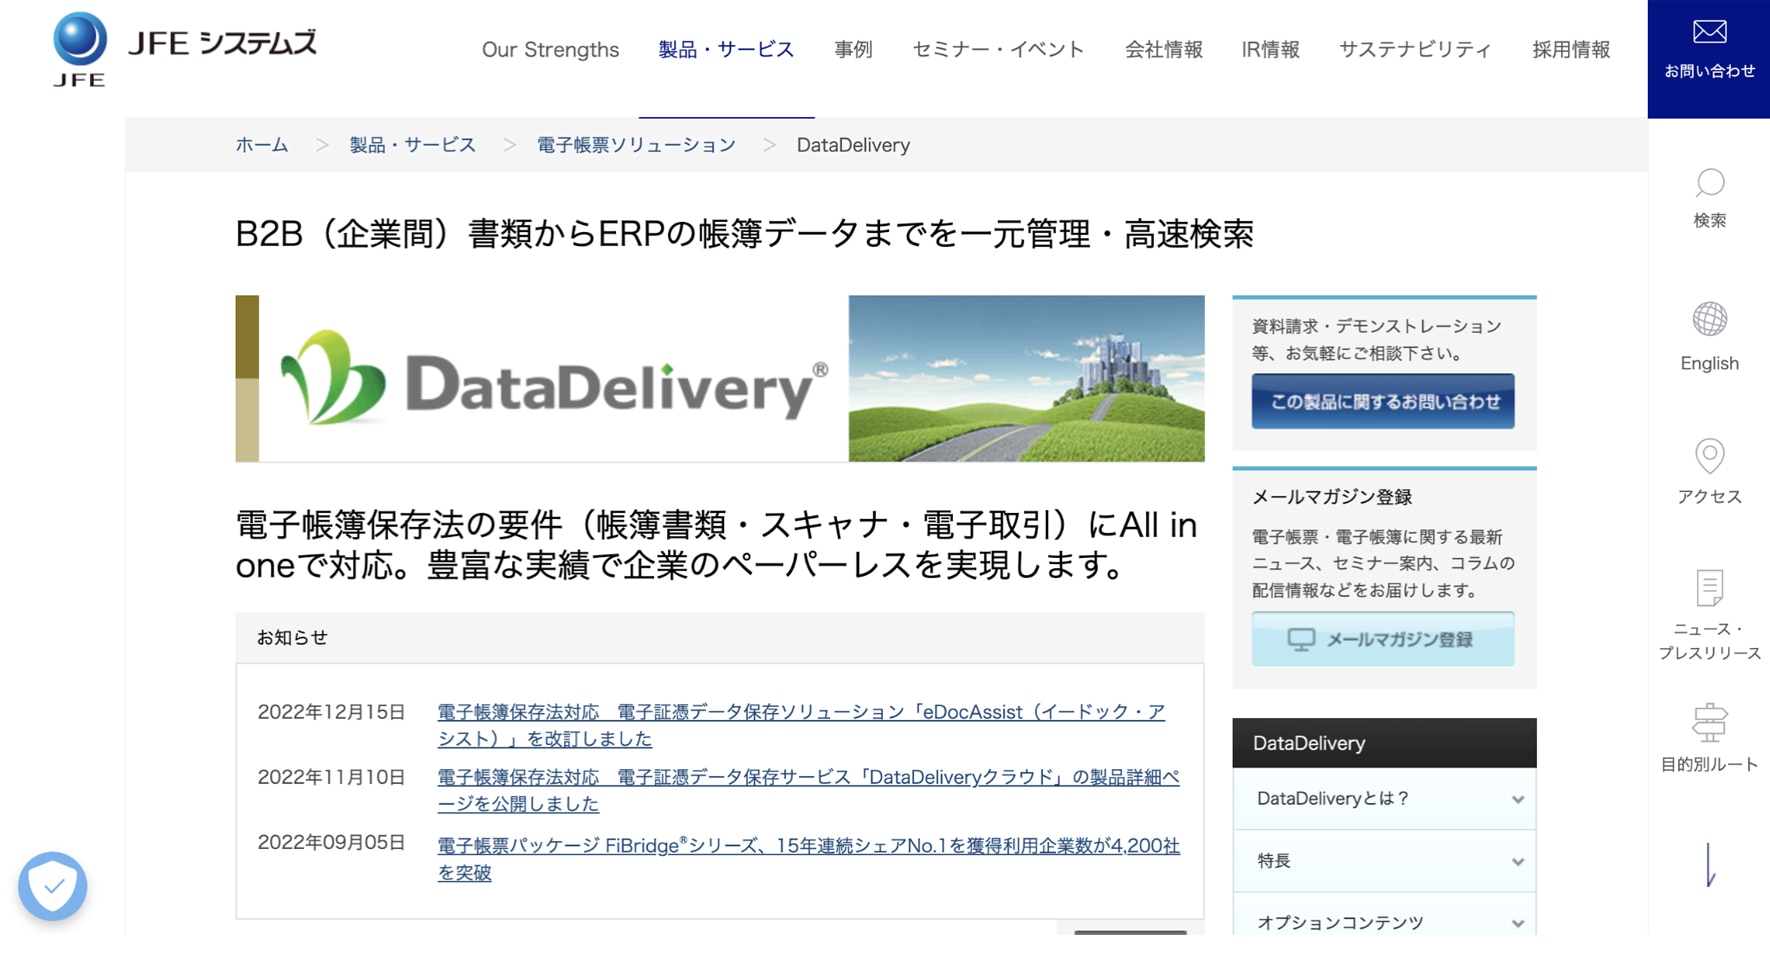 DataDelivery